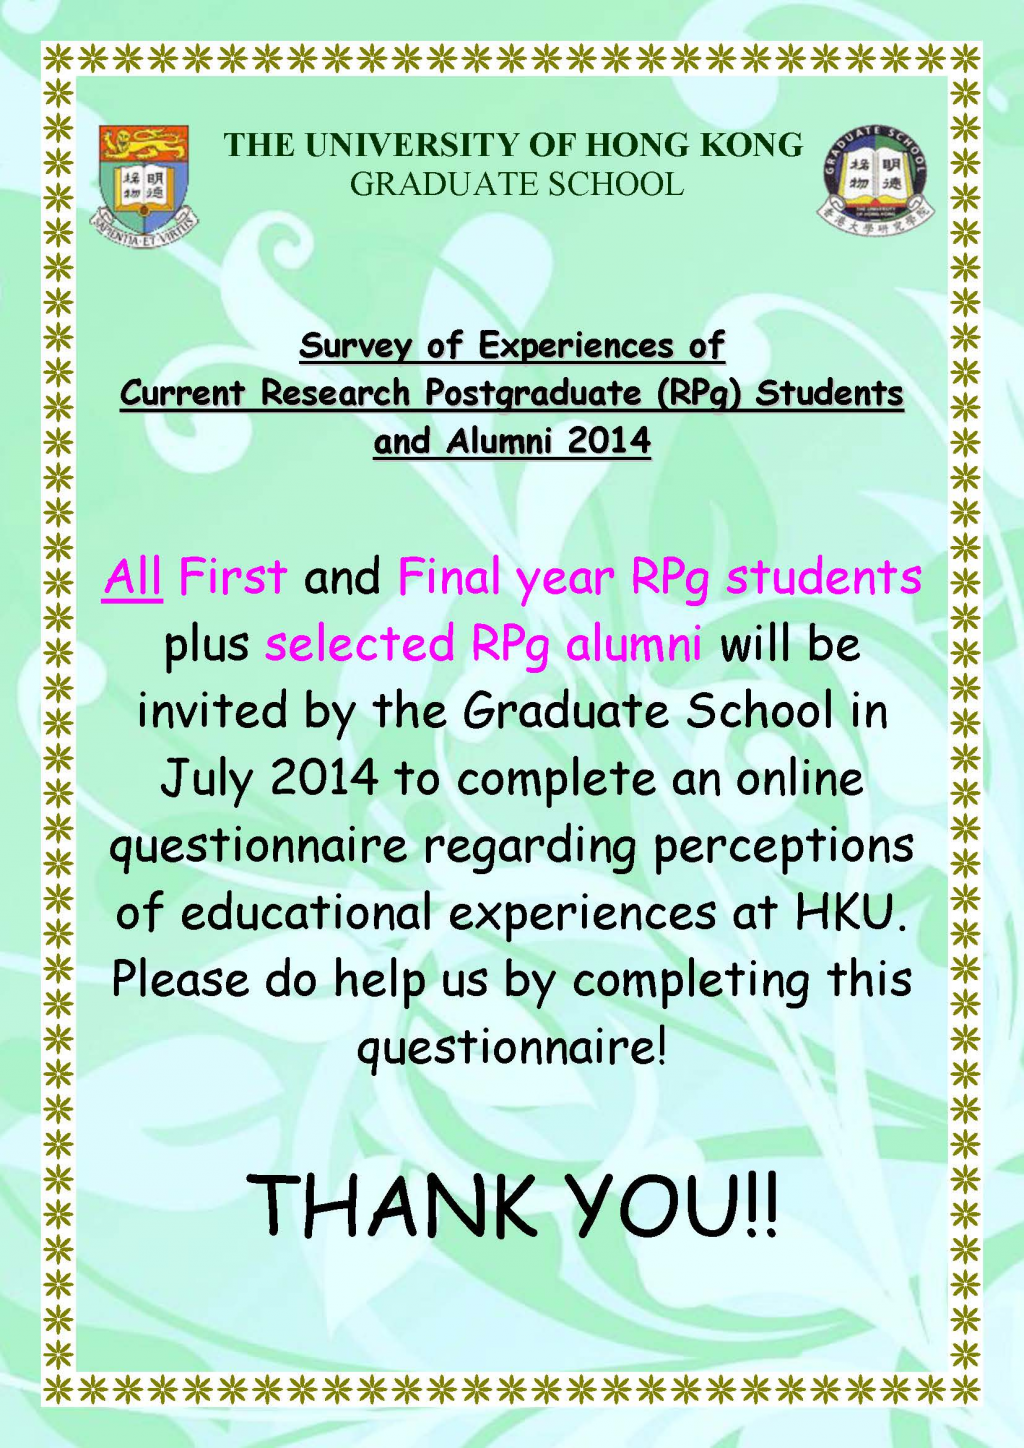 Survey of Experiences of Current Research Postgraduate (RPg) Students and Alumni 2014